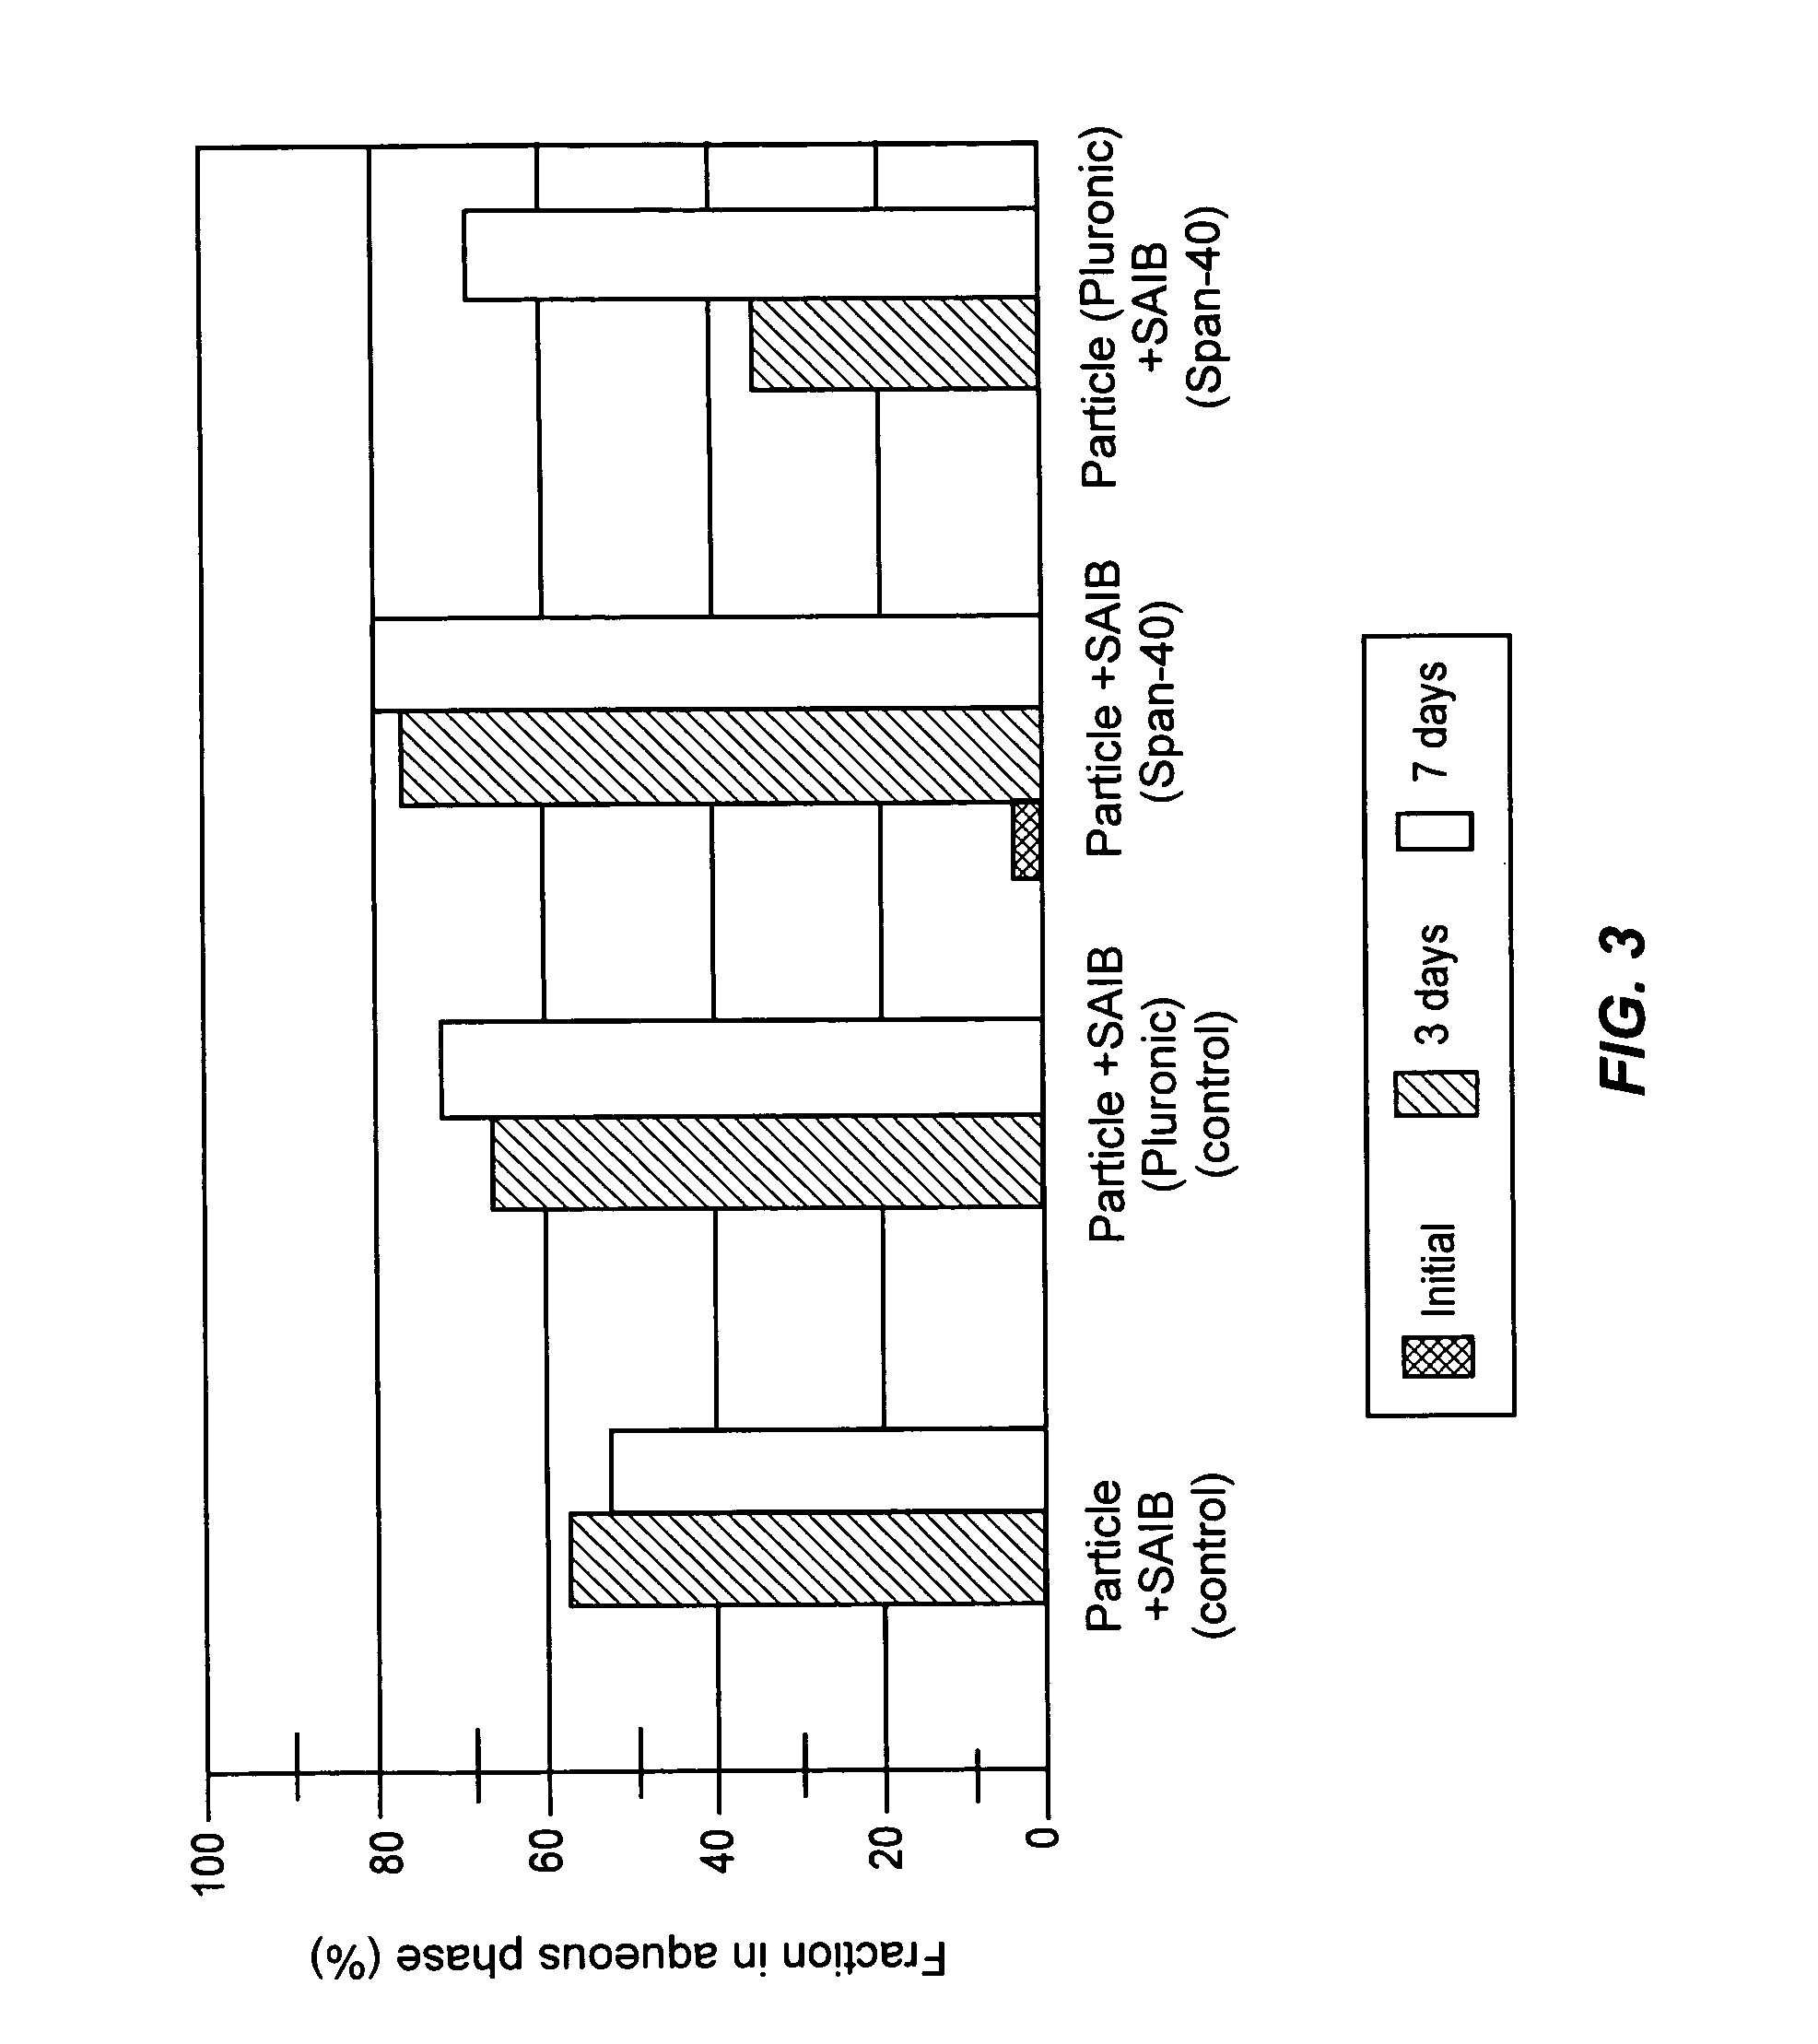 Formulations having increased stability during transition from hydrophobic vehicle to hydrophilic medium